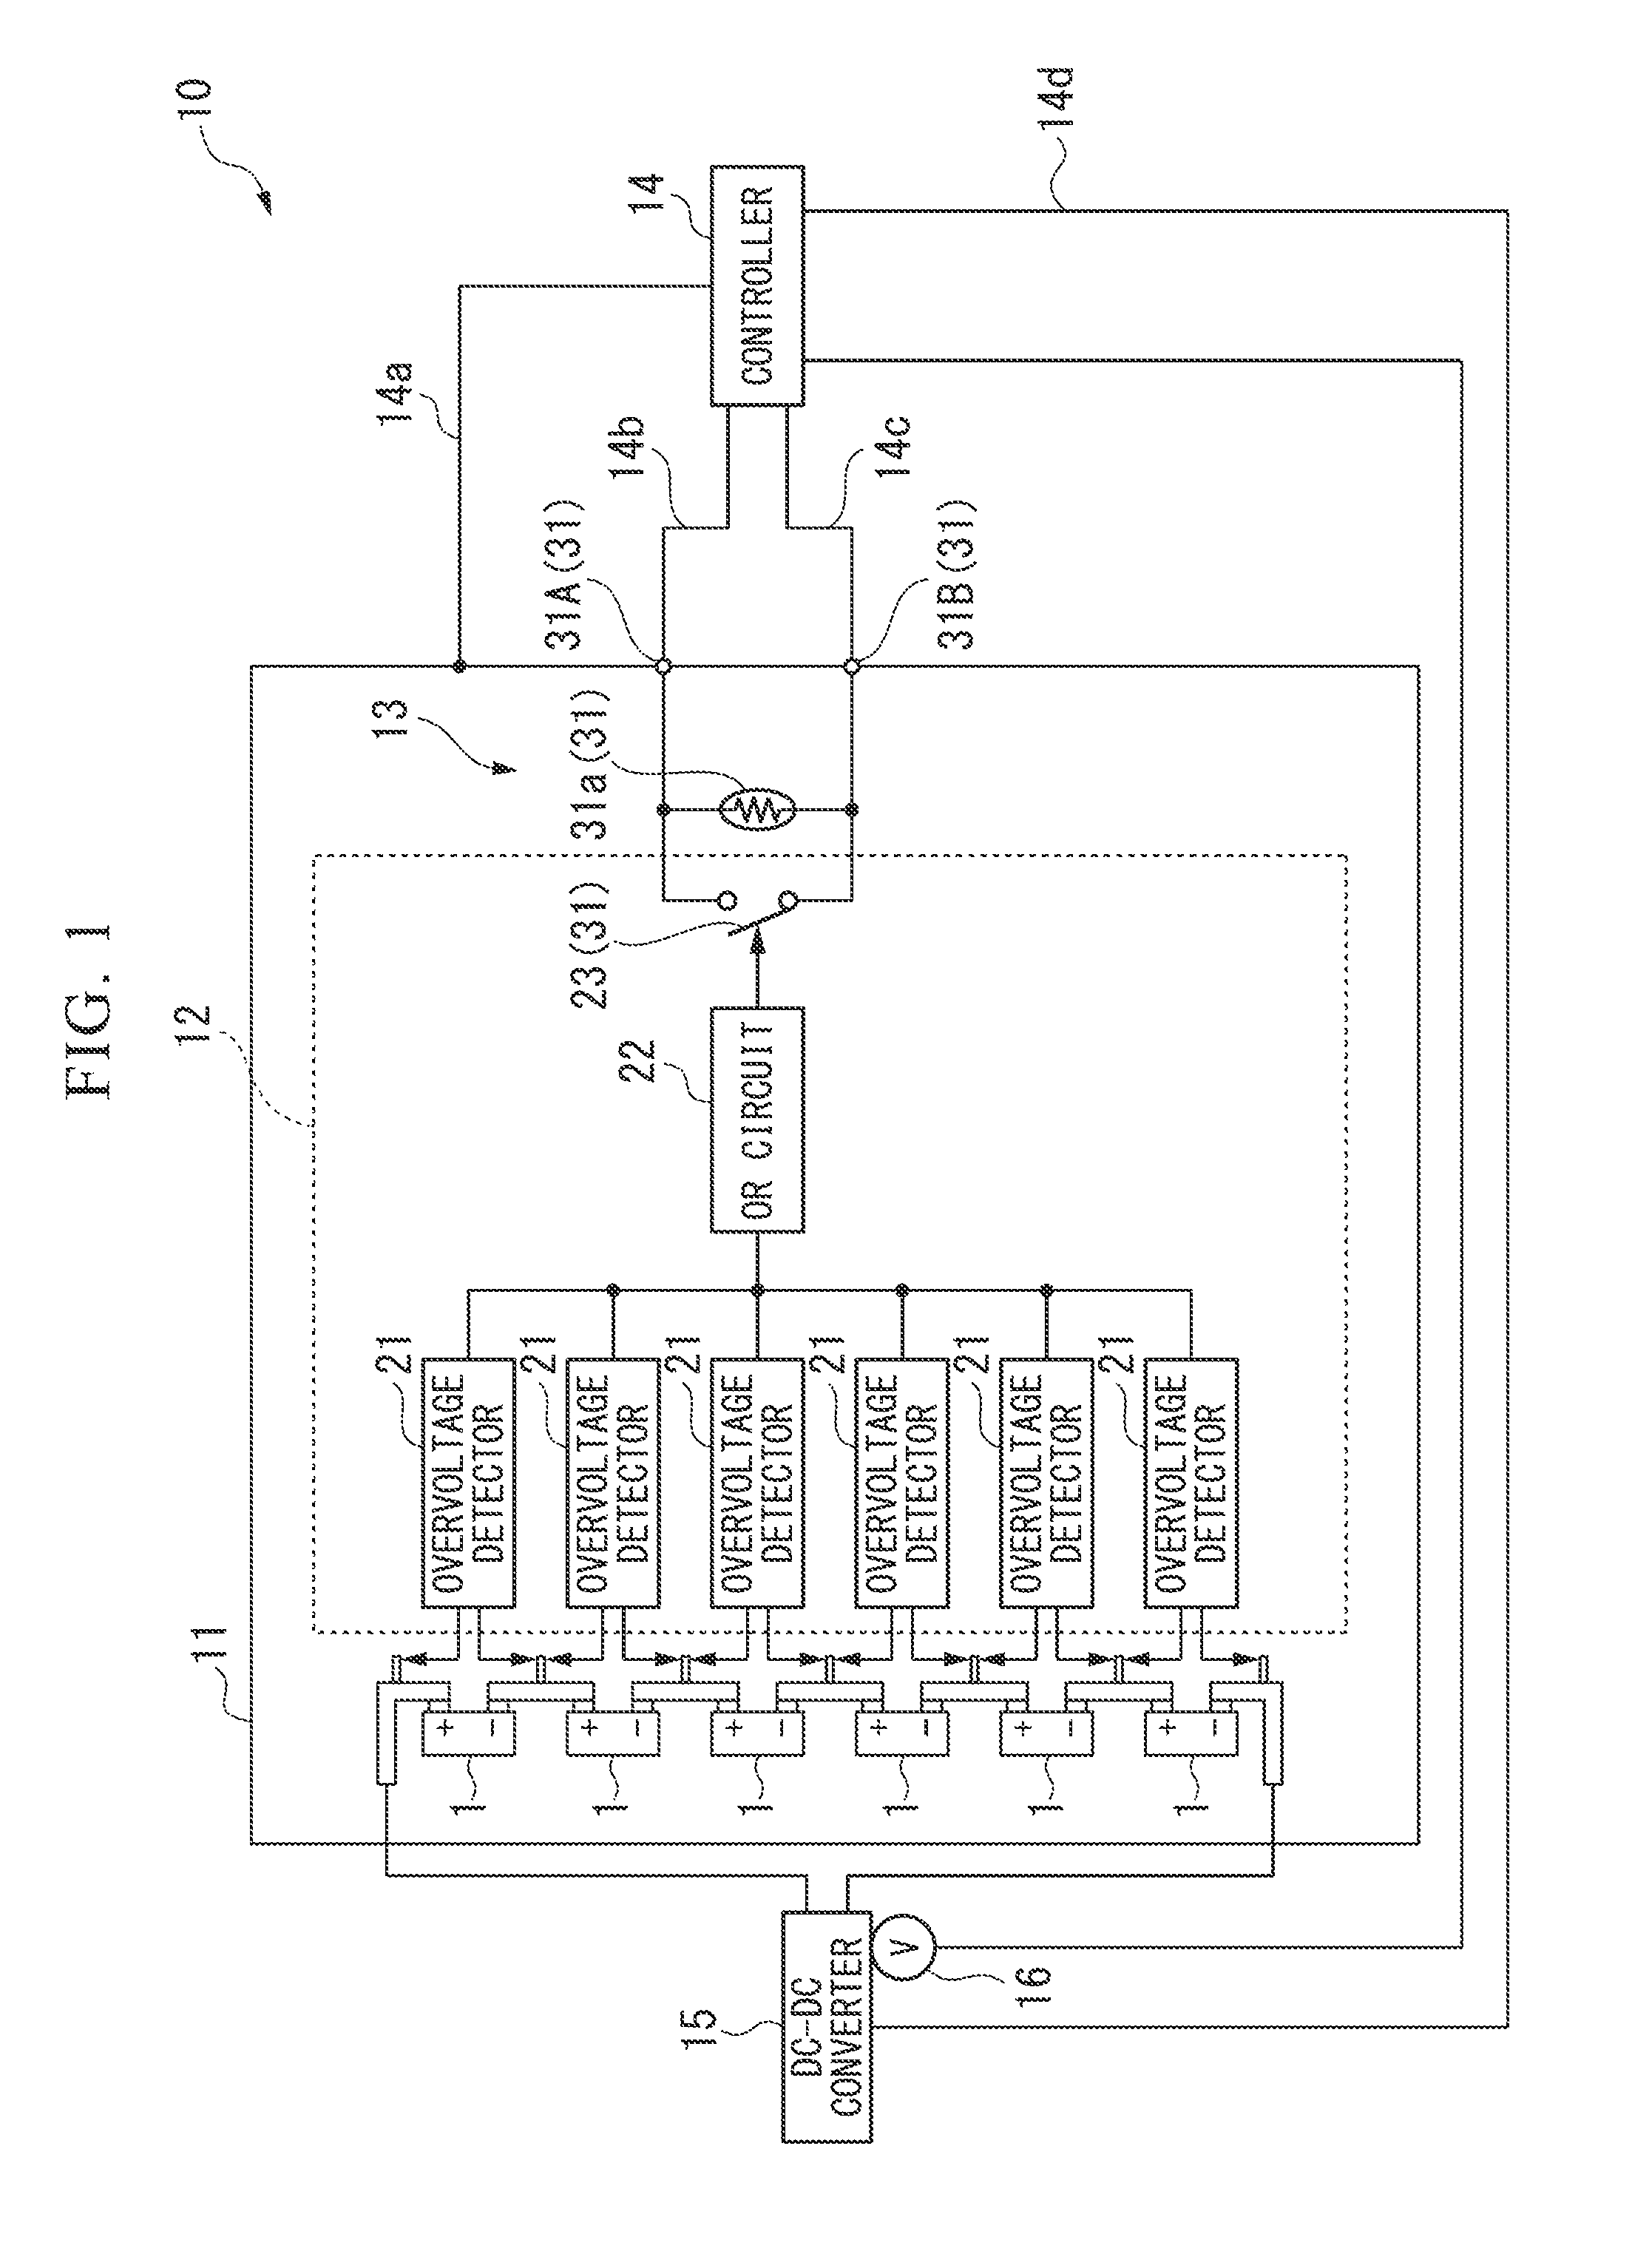 Abnormality detection device